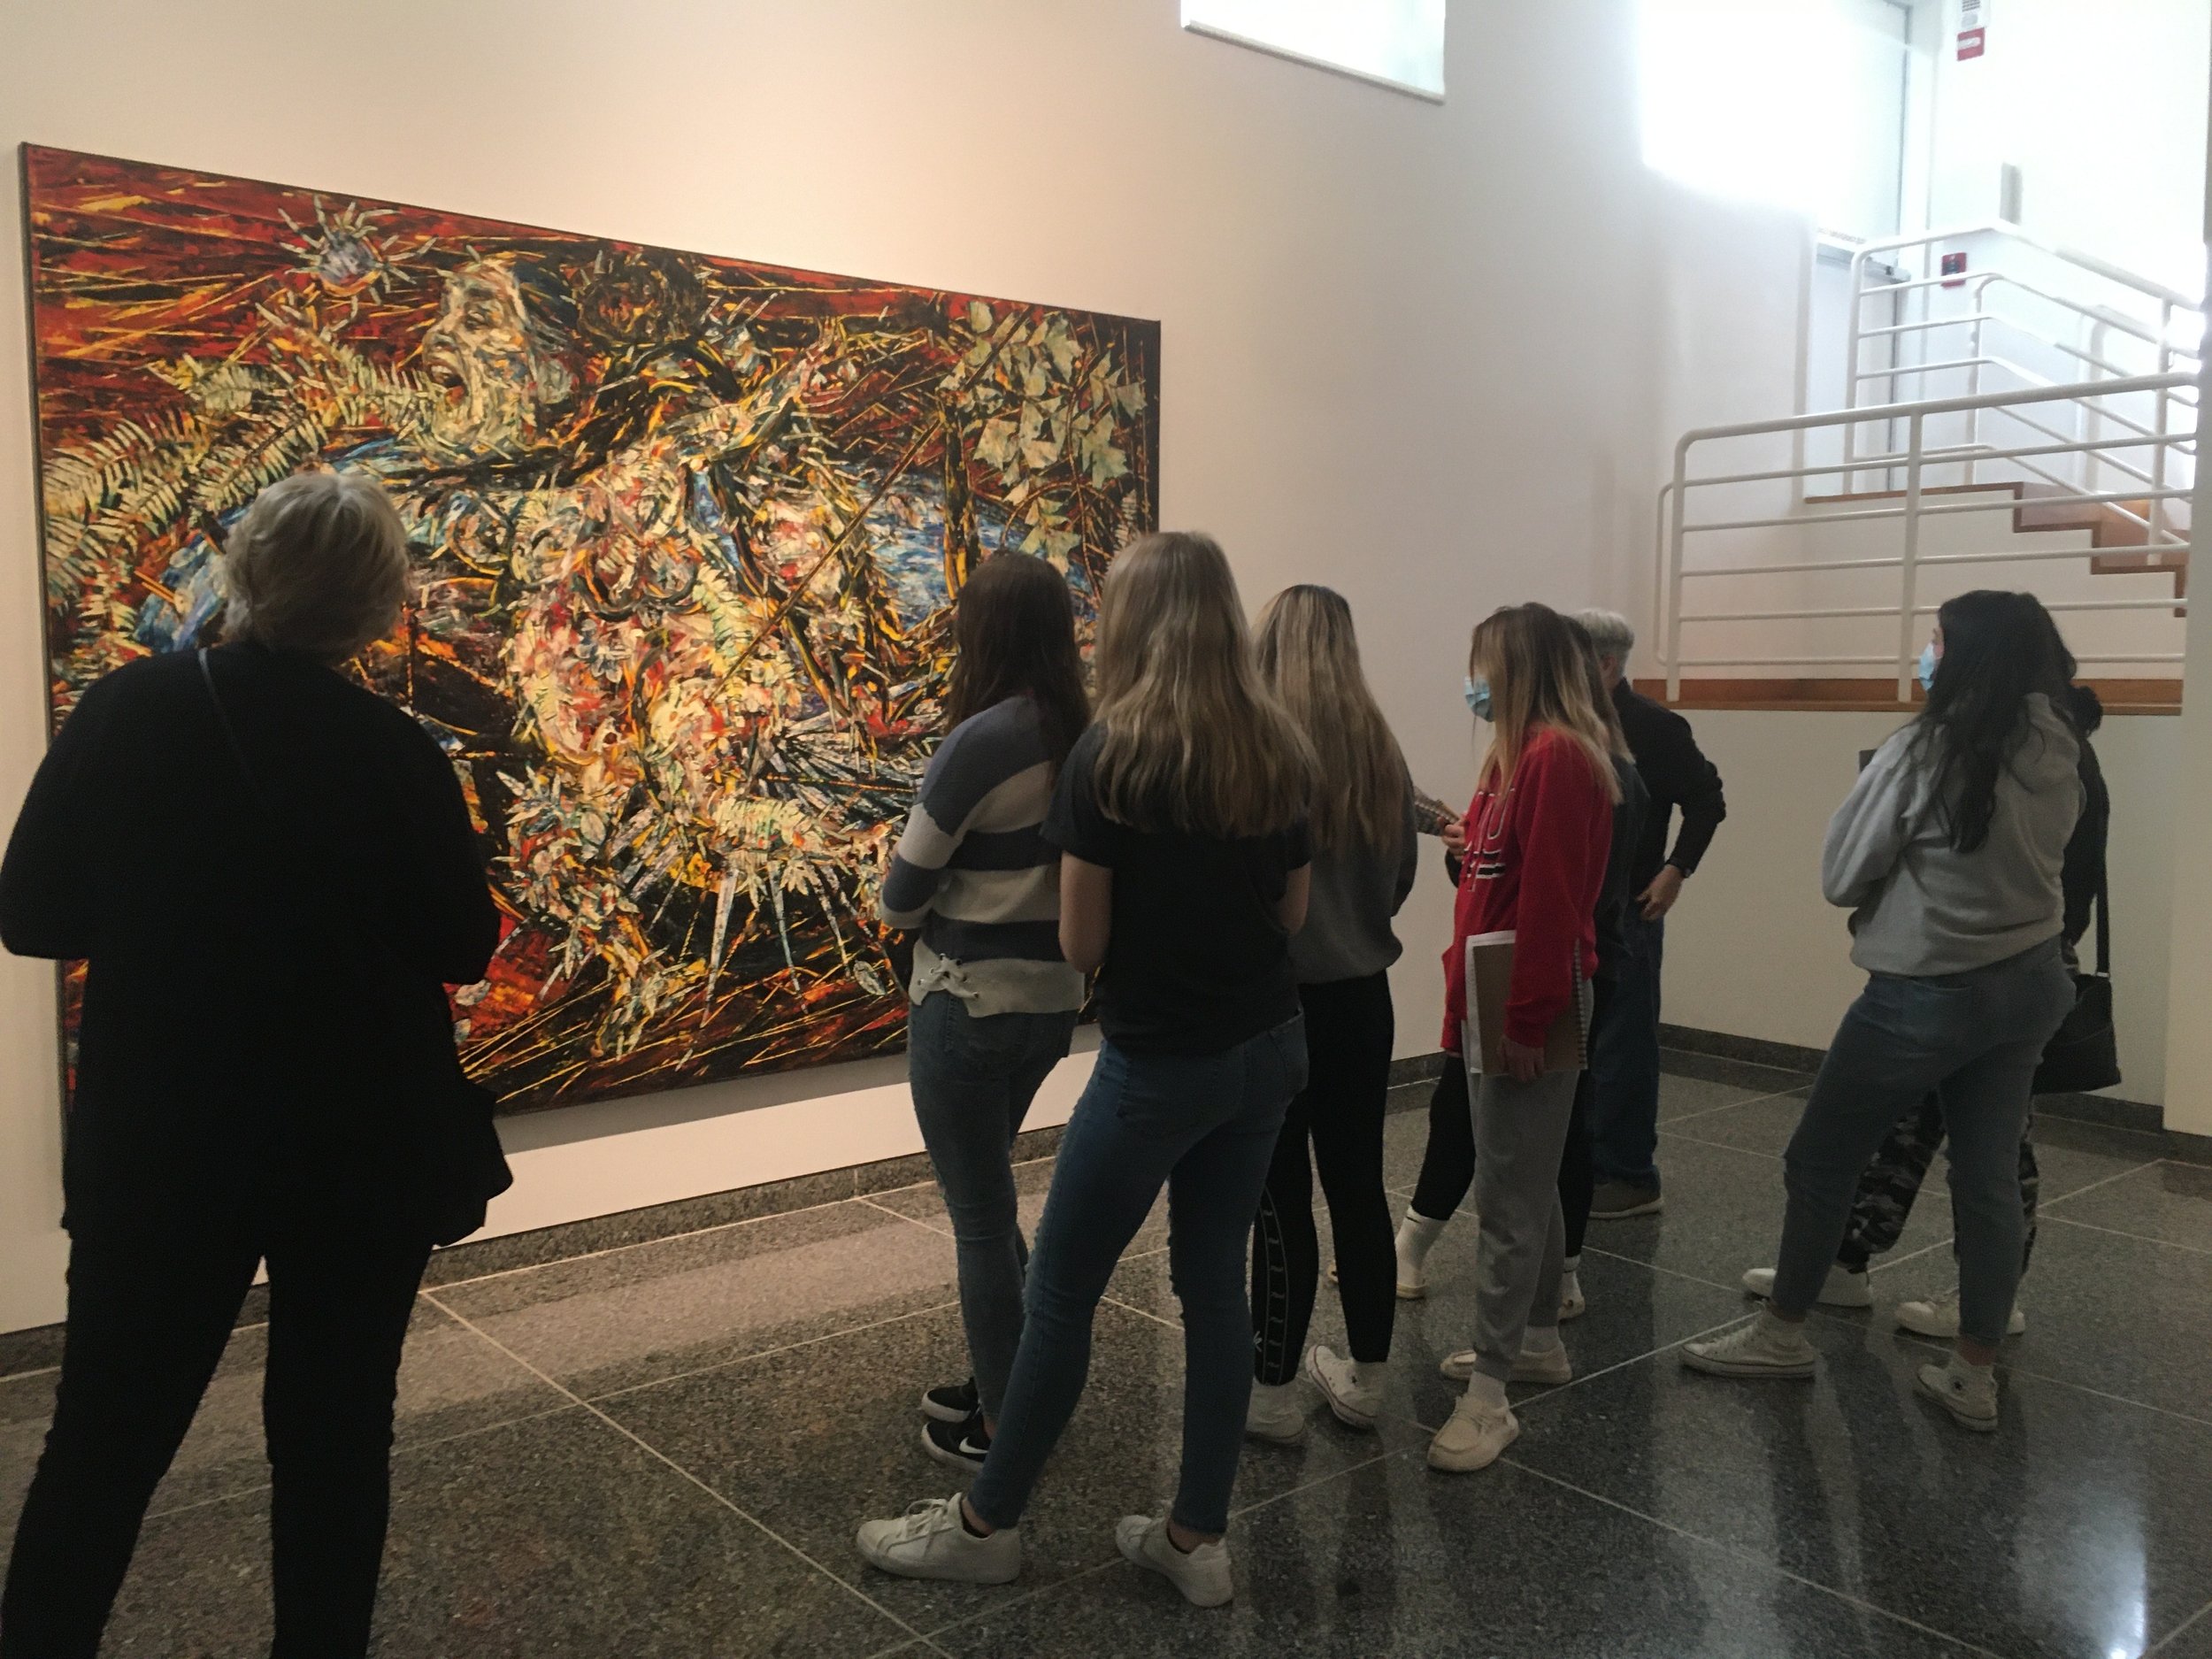 Students look at Hurricane from the south painted by Arnaldo Roche-Rabell